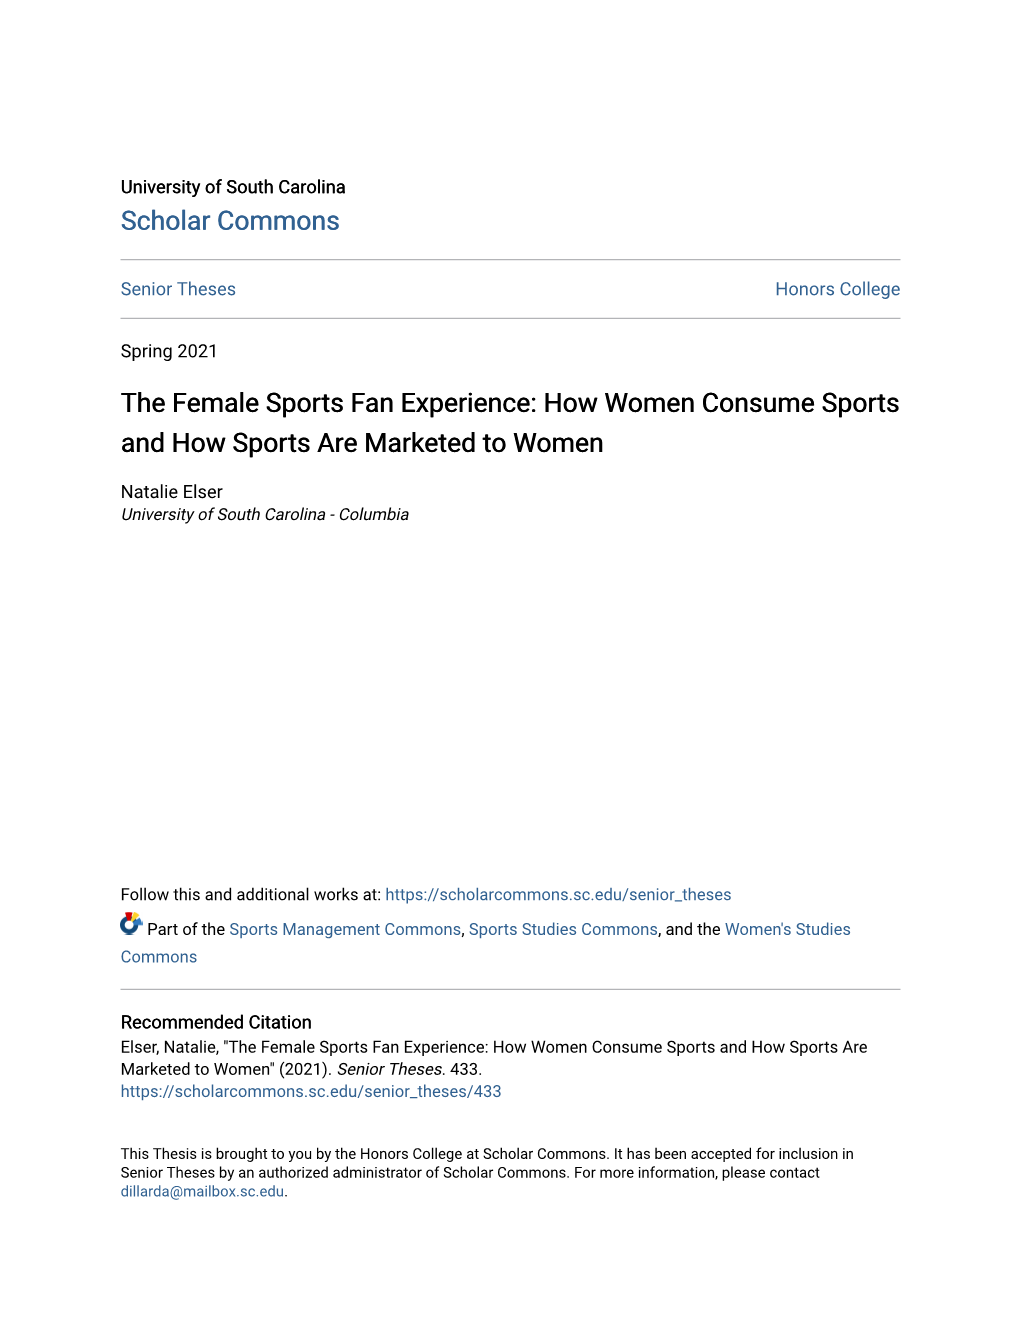 The Female Sports Fan Experience: How Women Consume Sports and How Sports Are Marketed to Women